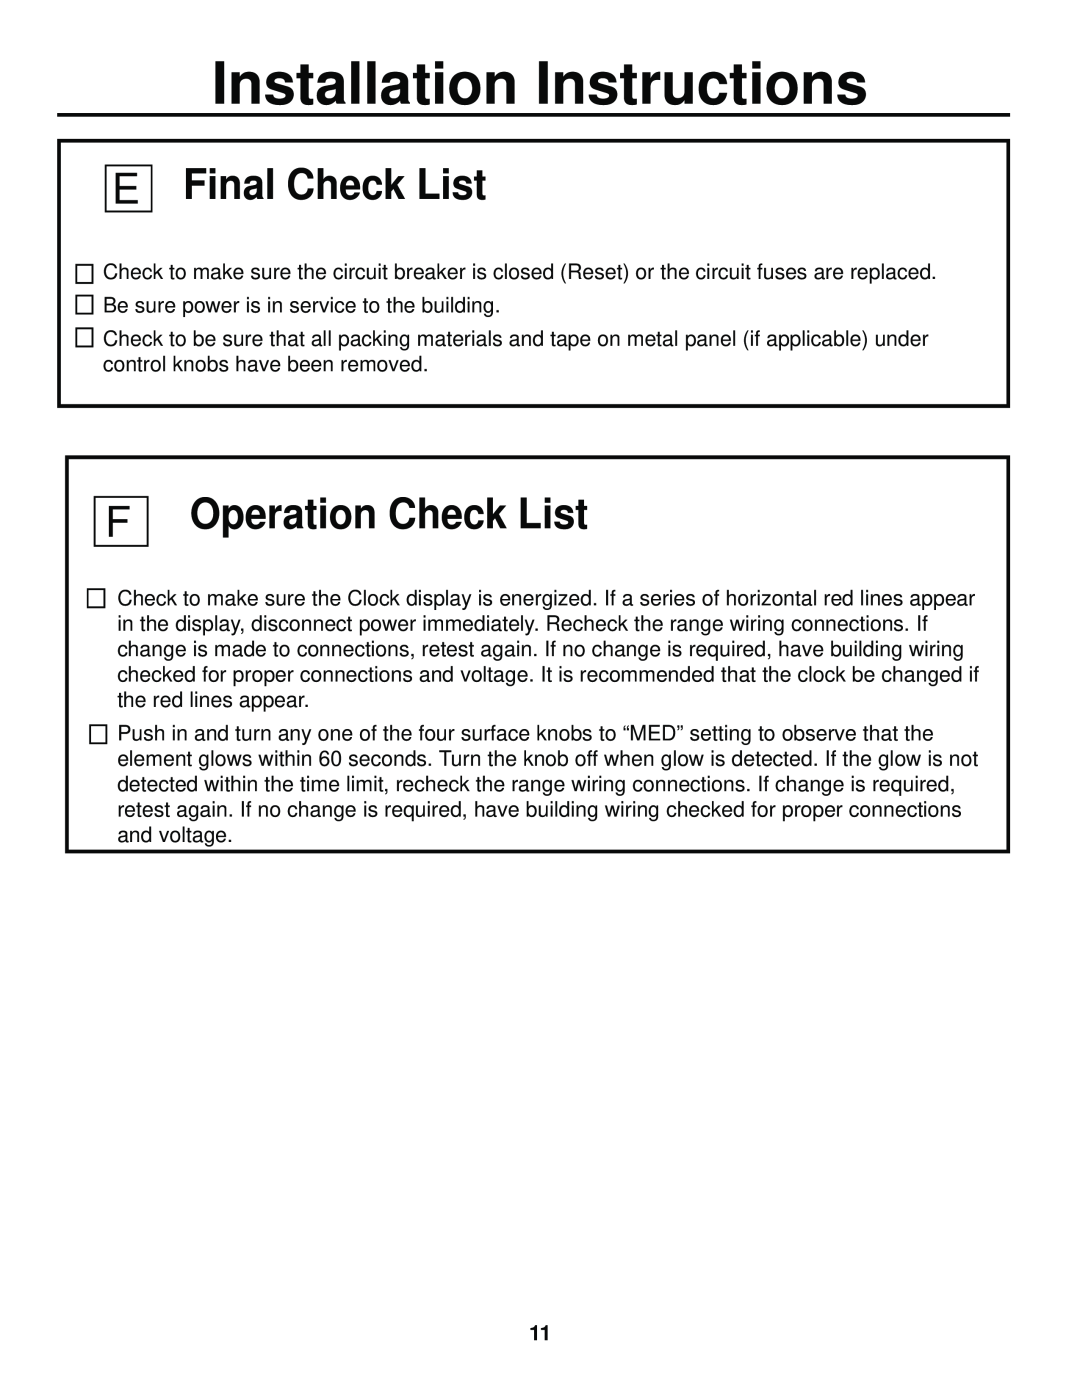 GE 31-10463, 229C4053P447-3 1 installation instructions Final Check List, Operation Check List, Installation Instructions 